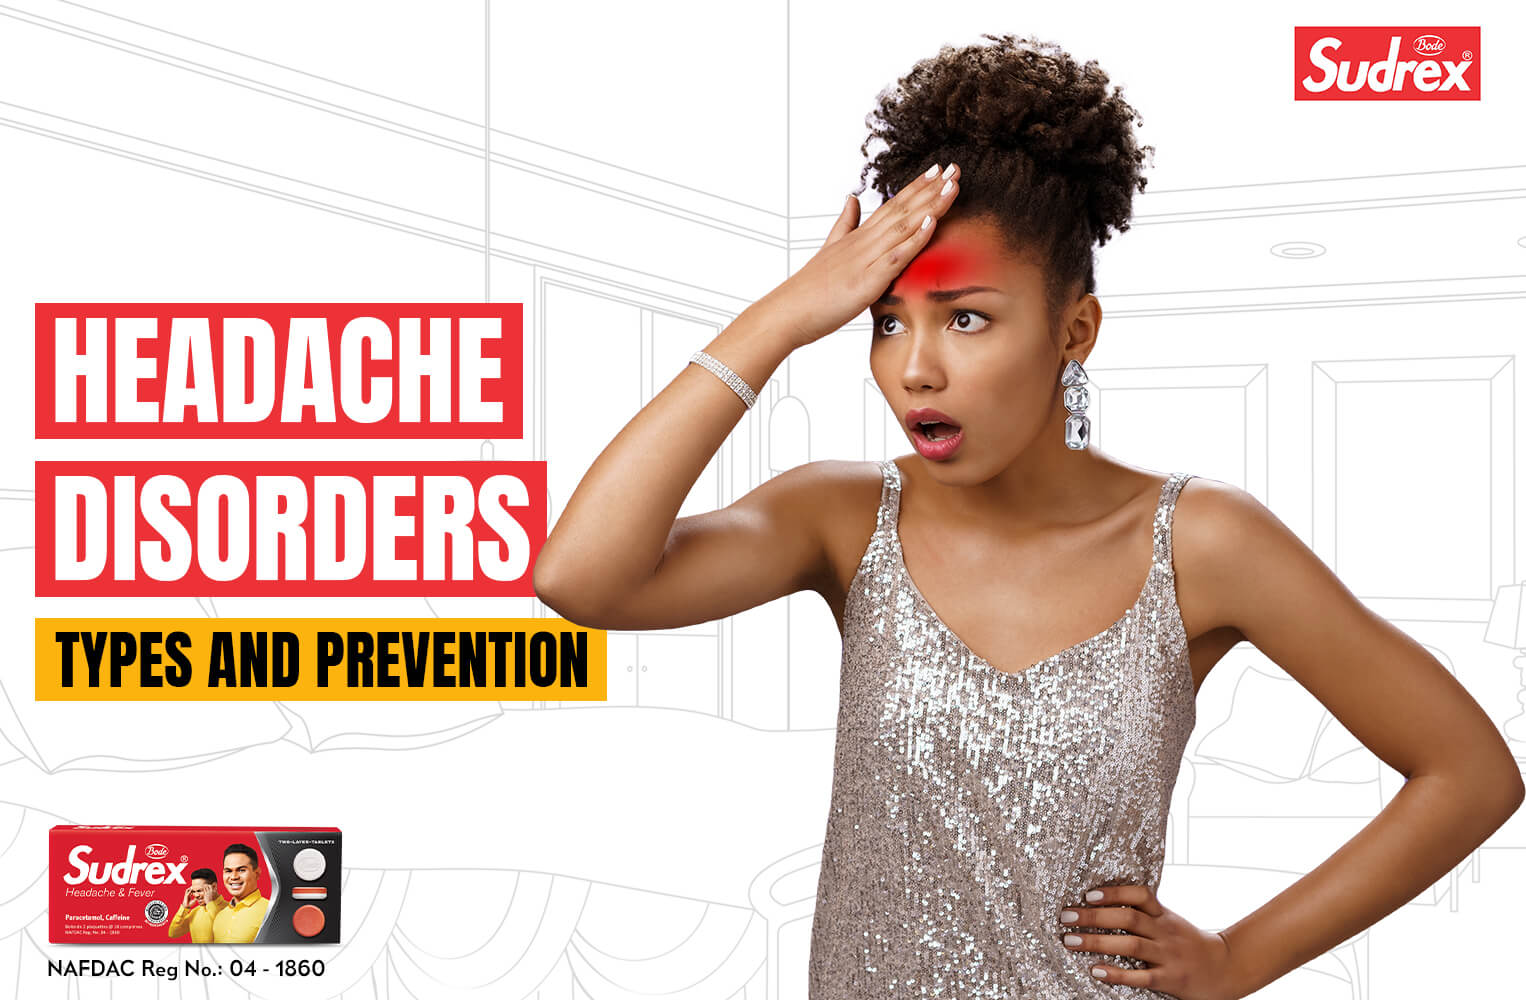 Headache Disorders, Types And Prevention